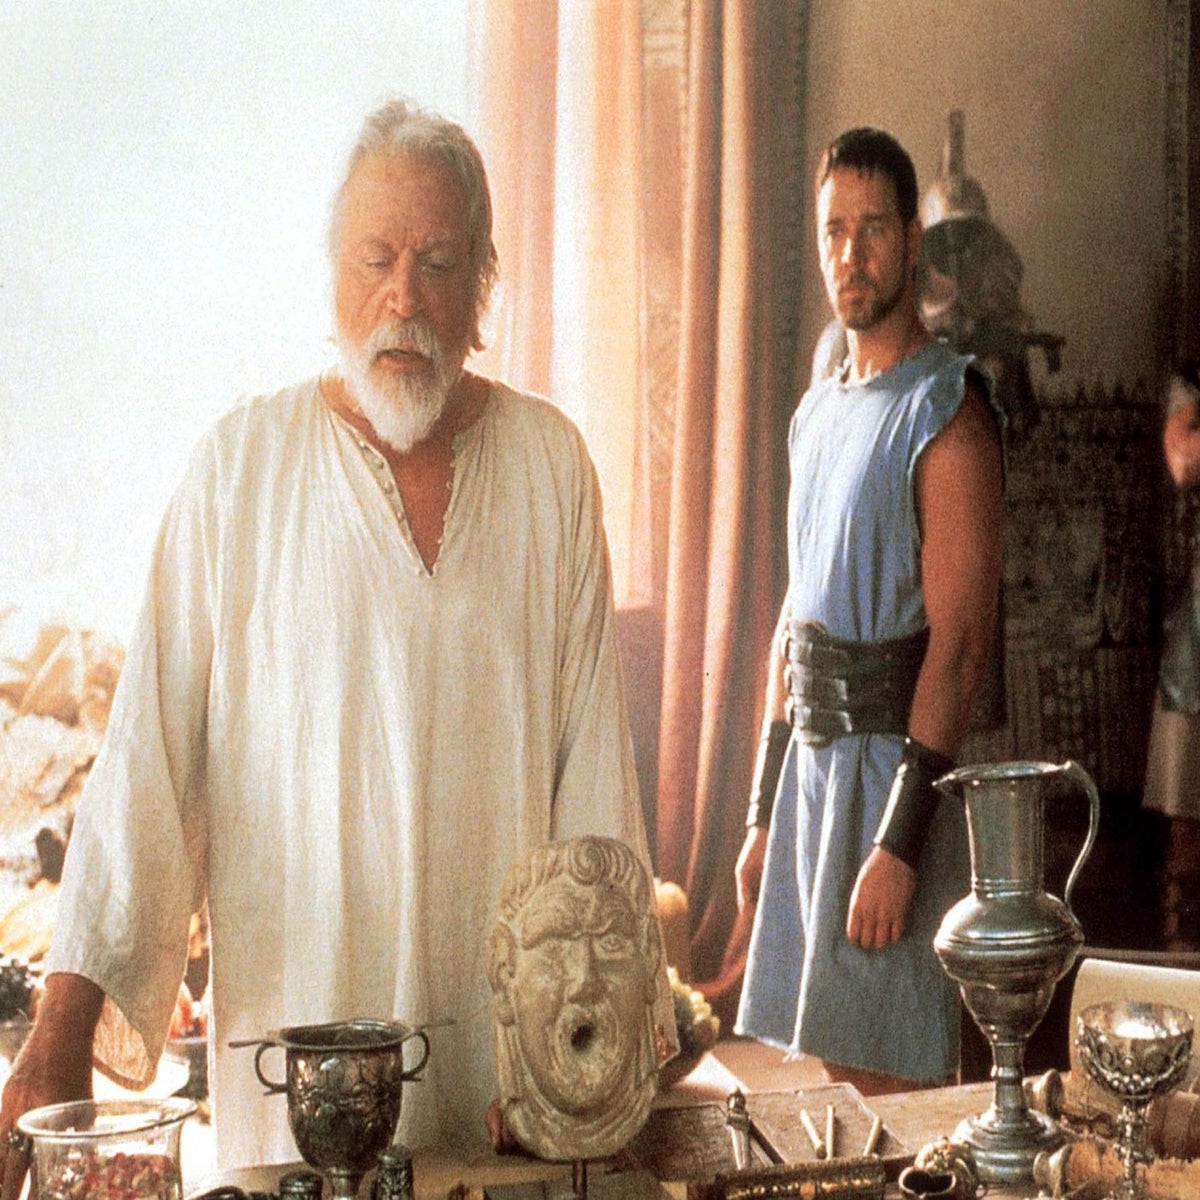 Ridley Scott says Oliver Reed 'dropped down dead' after